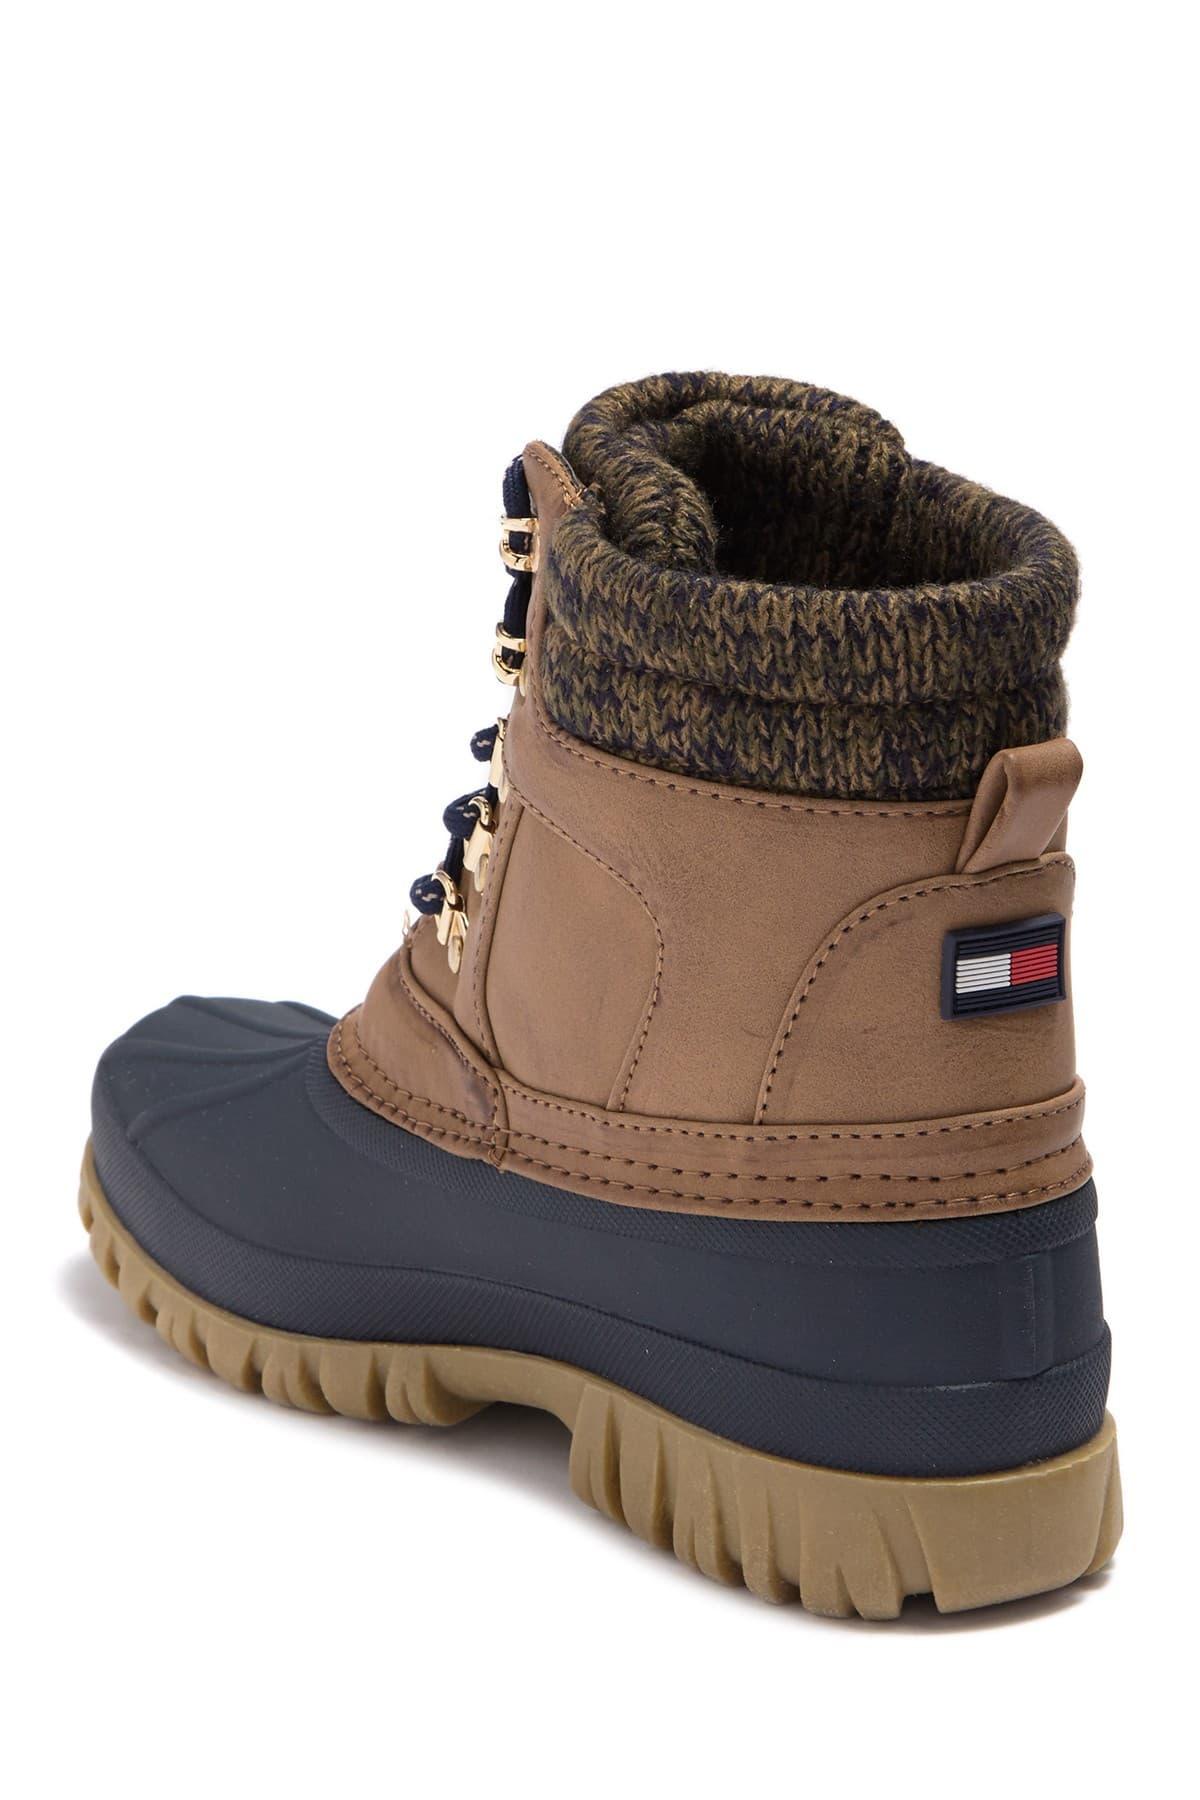 tommy hilfiger duck boots